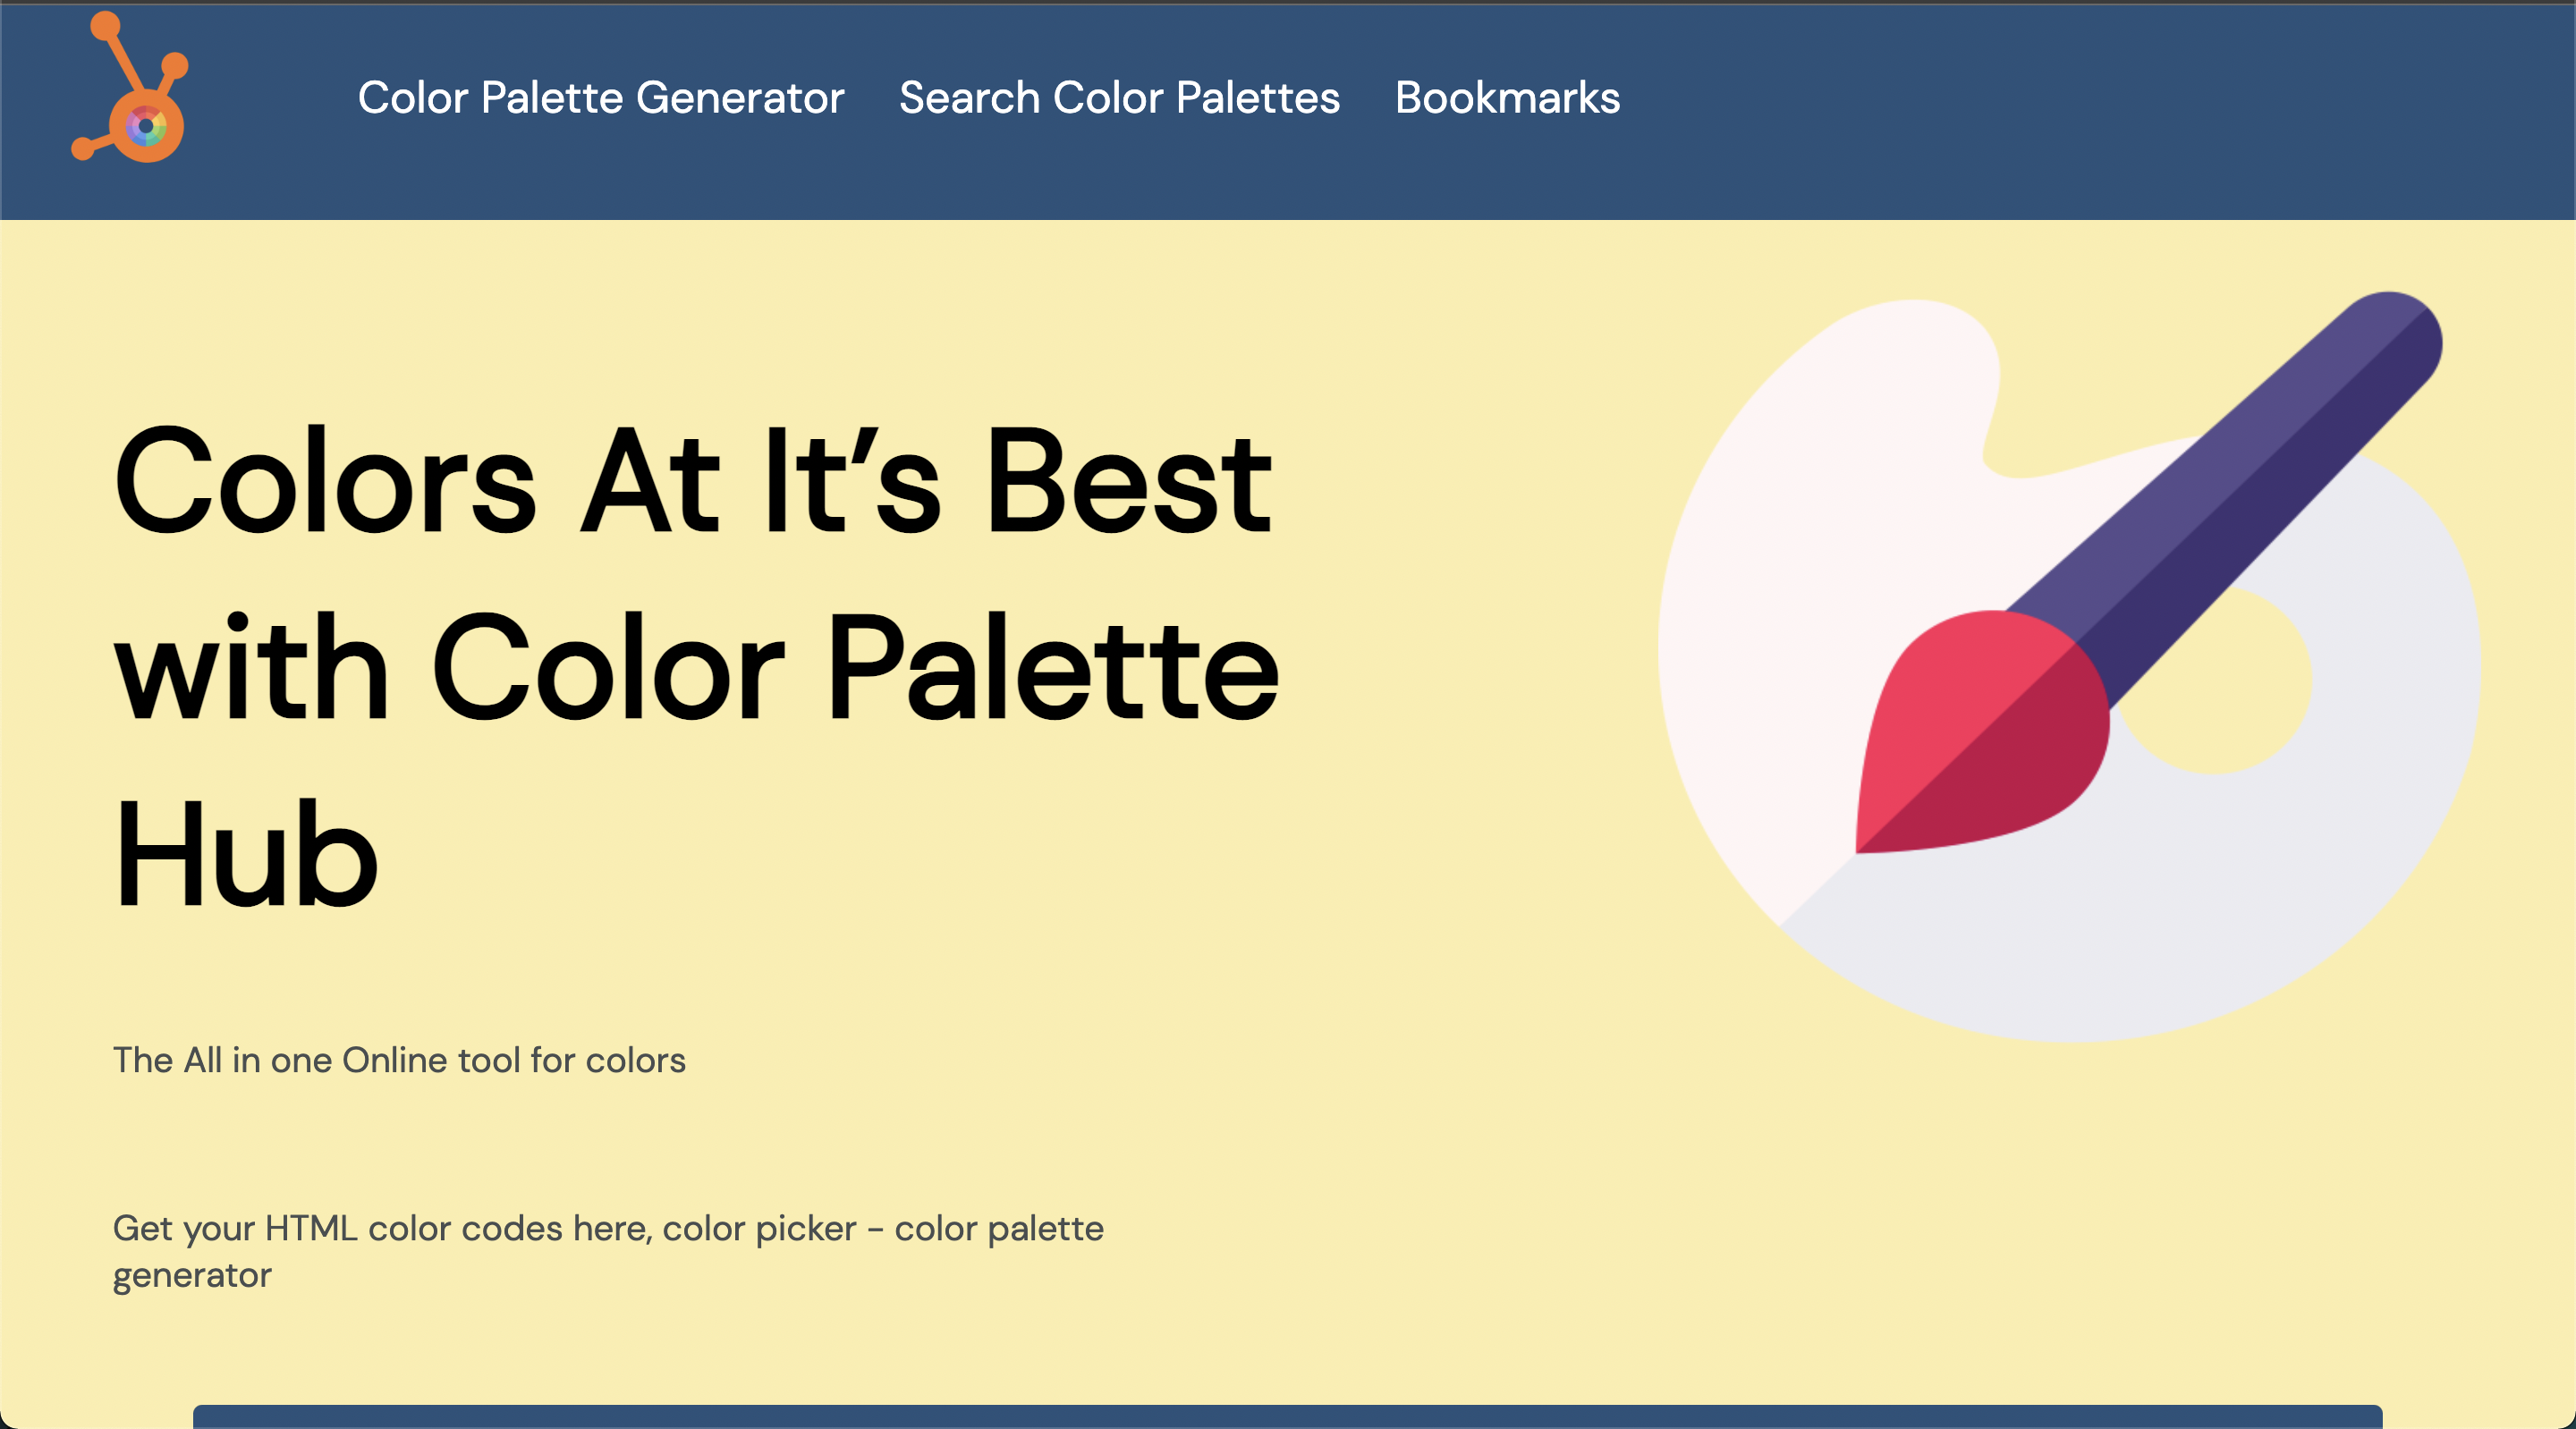 ColorPalette Hub